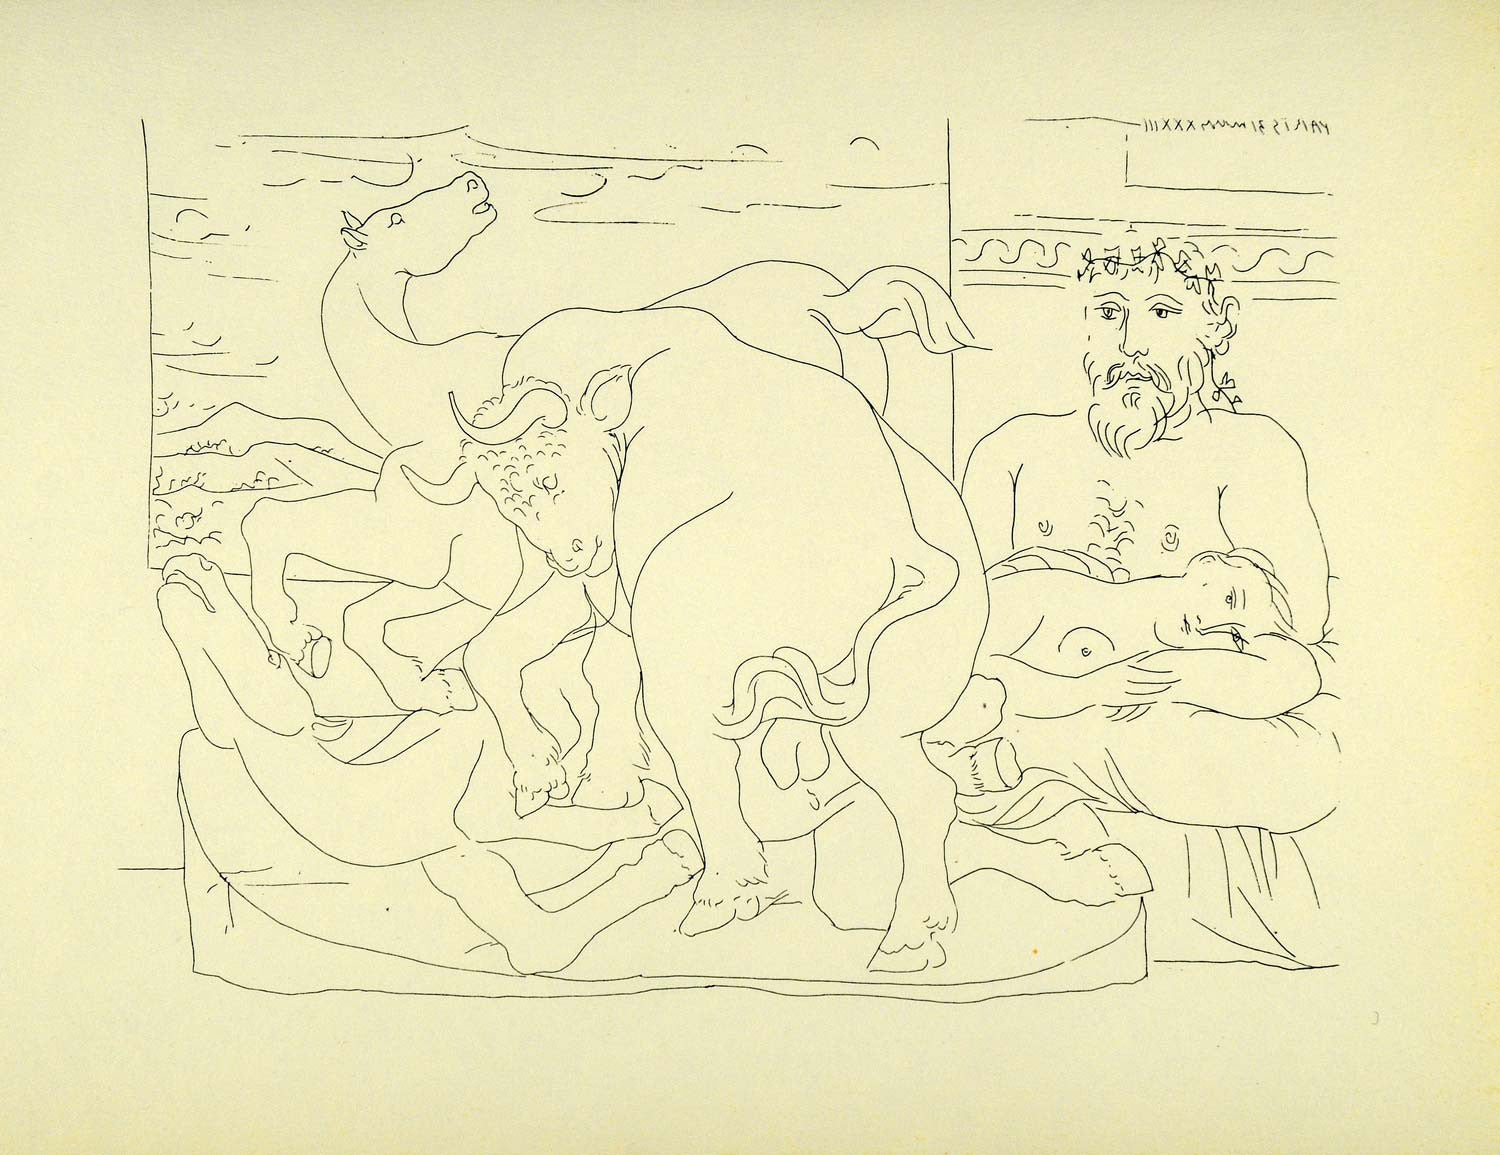 1956 Print Pablo Picasso Nude Reclining Model Sculptor Sculpture Bull Two Horses - Period Paper
